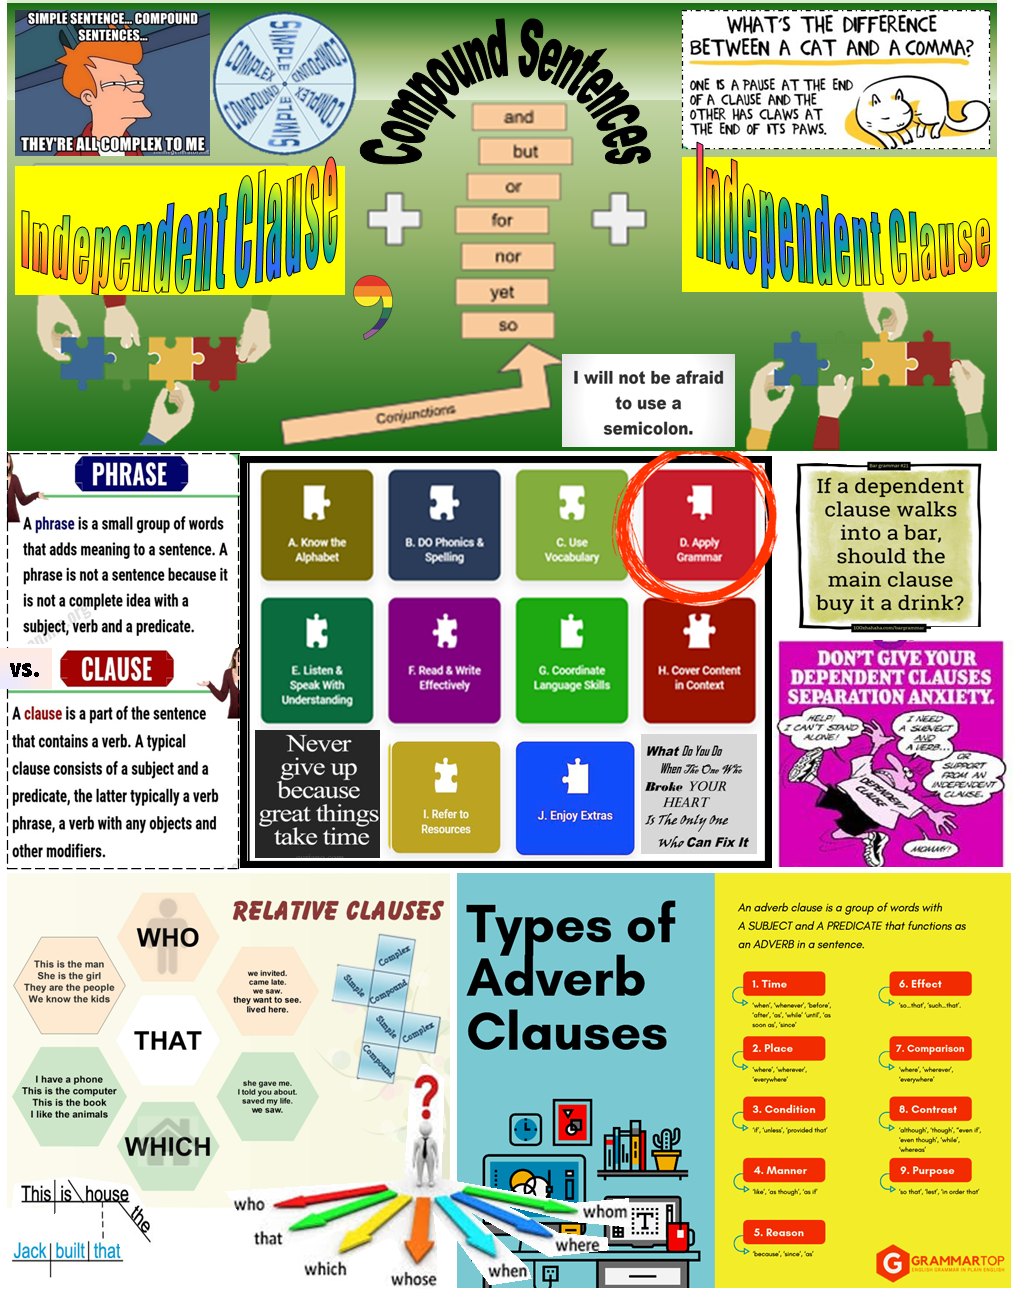 independent clause examples for kids